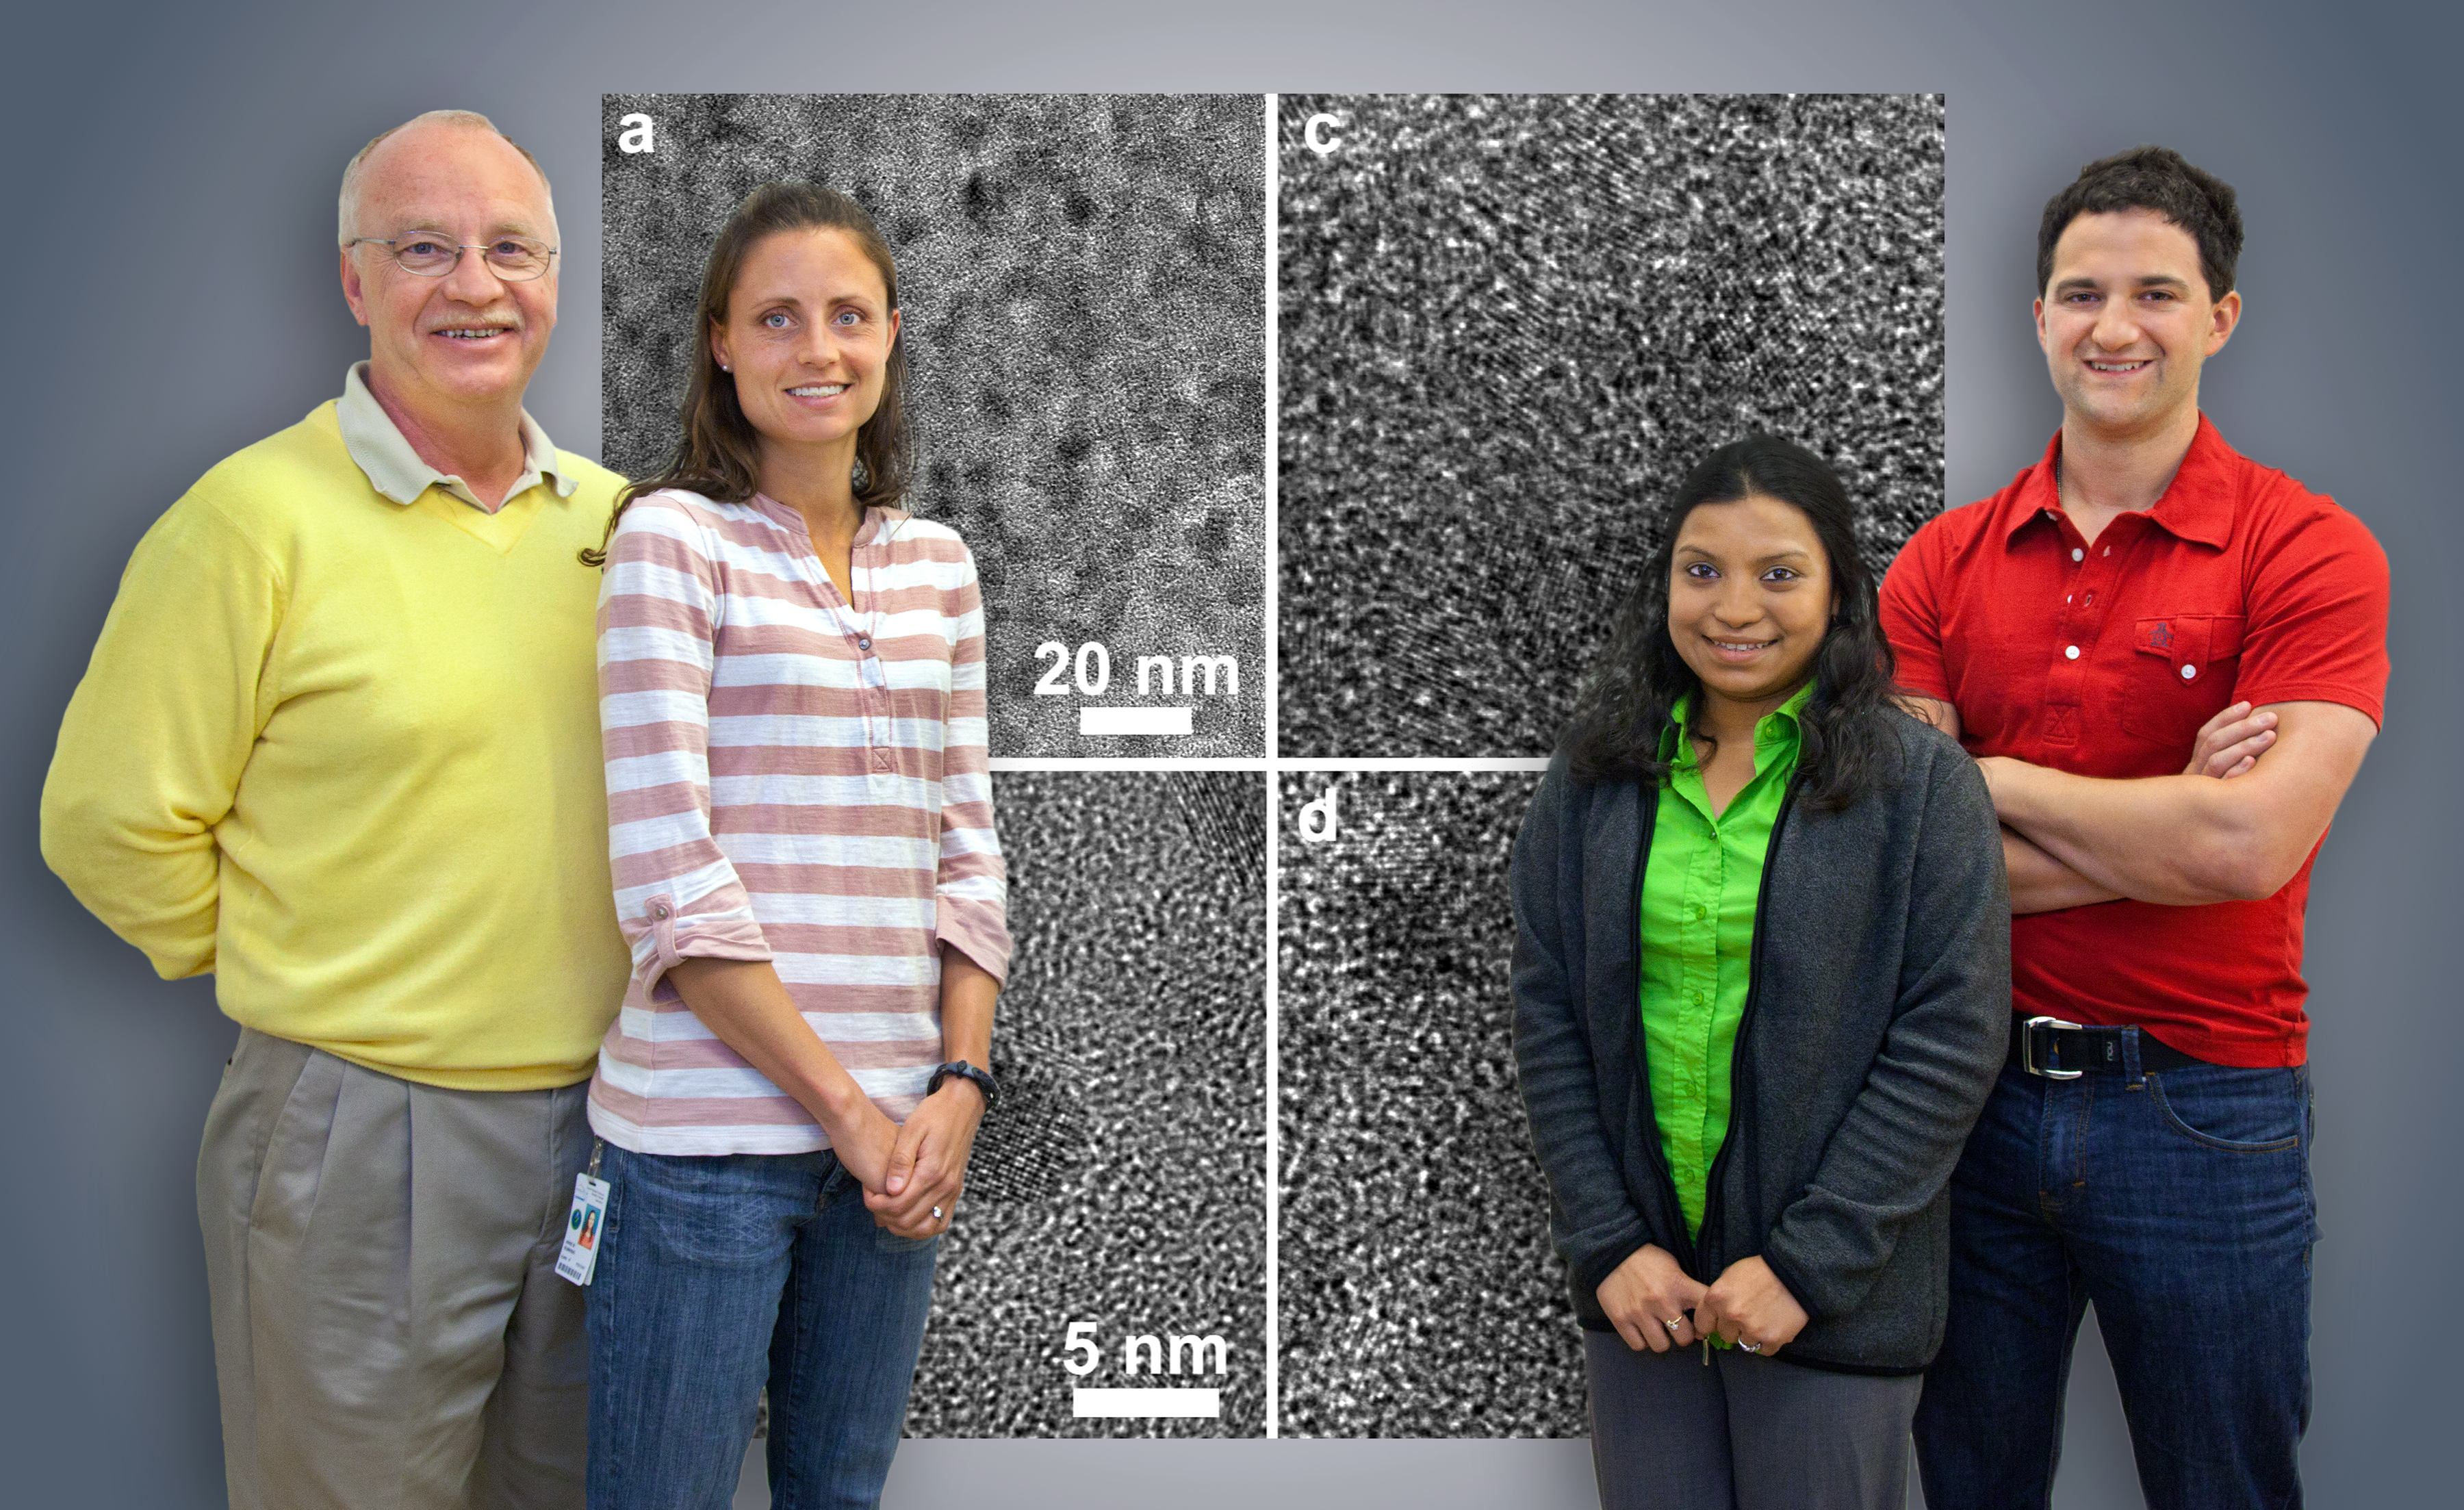 Four people stand in front of Transmission electron micrographs.